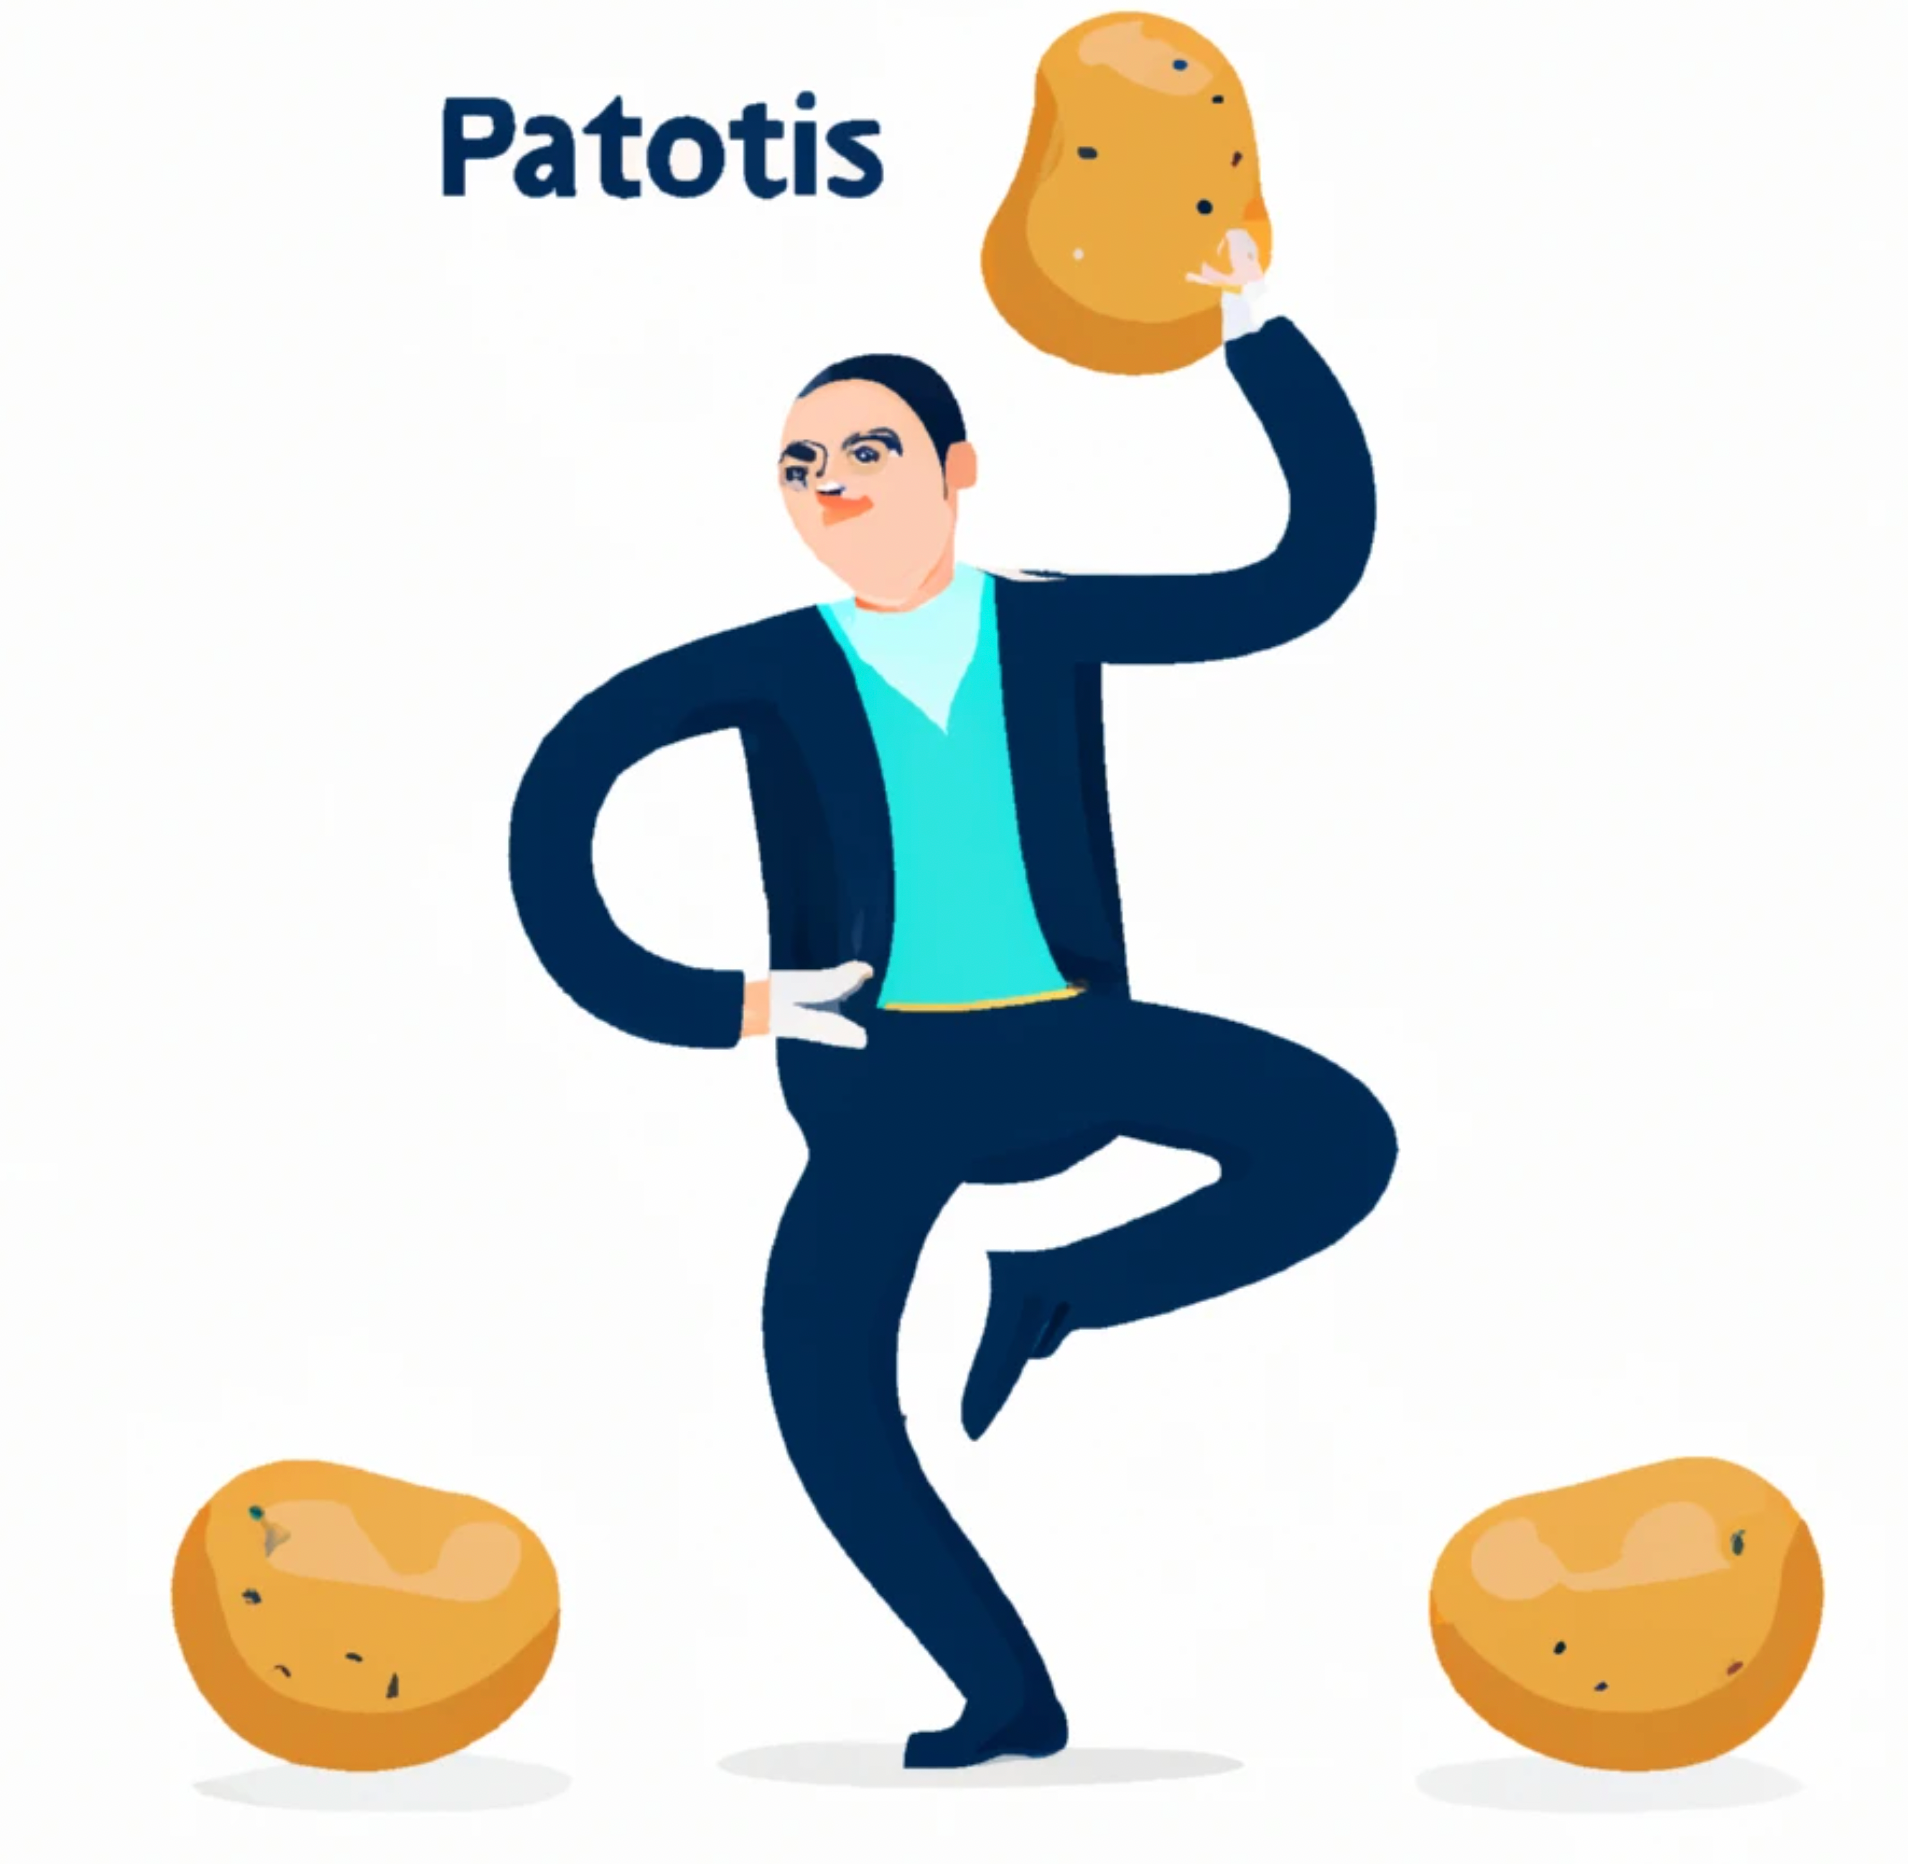 “a very smart AI agent doing interpretative dance with potatoes”. dall-e generated, of course